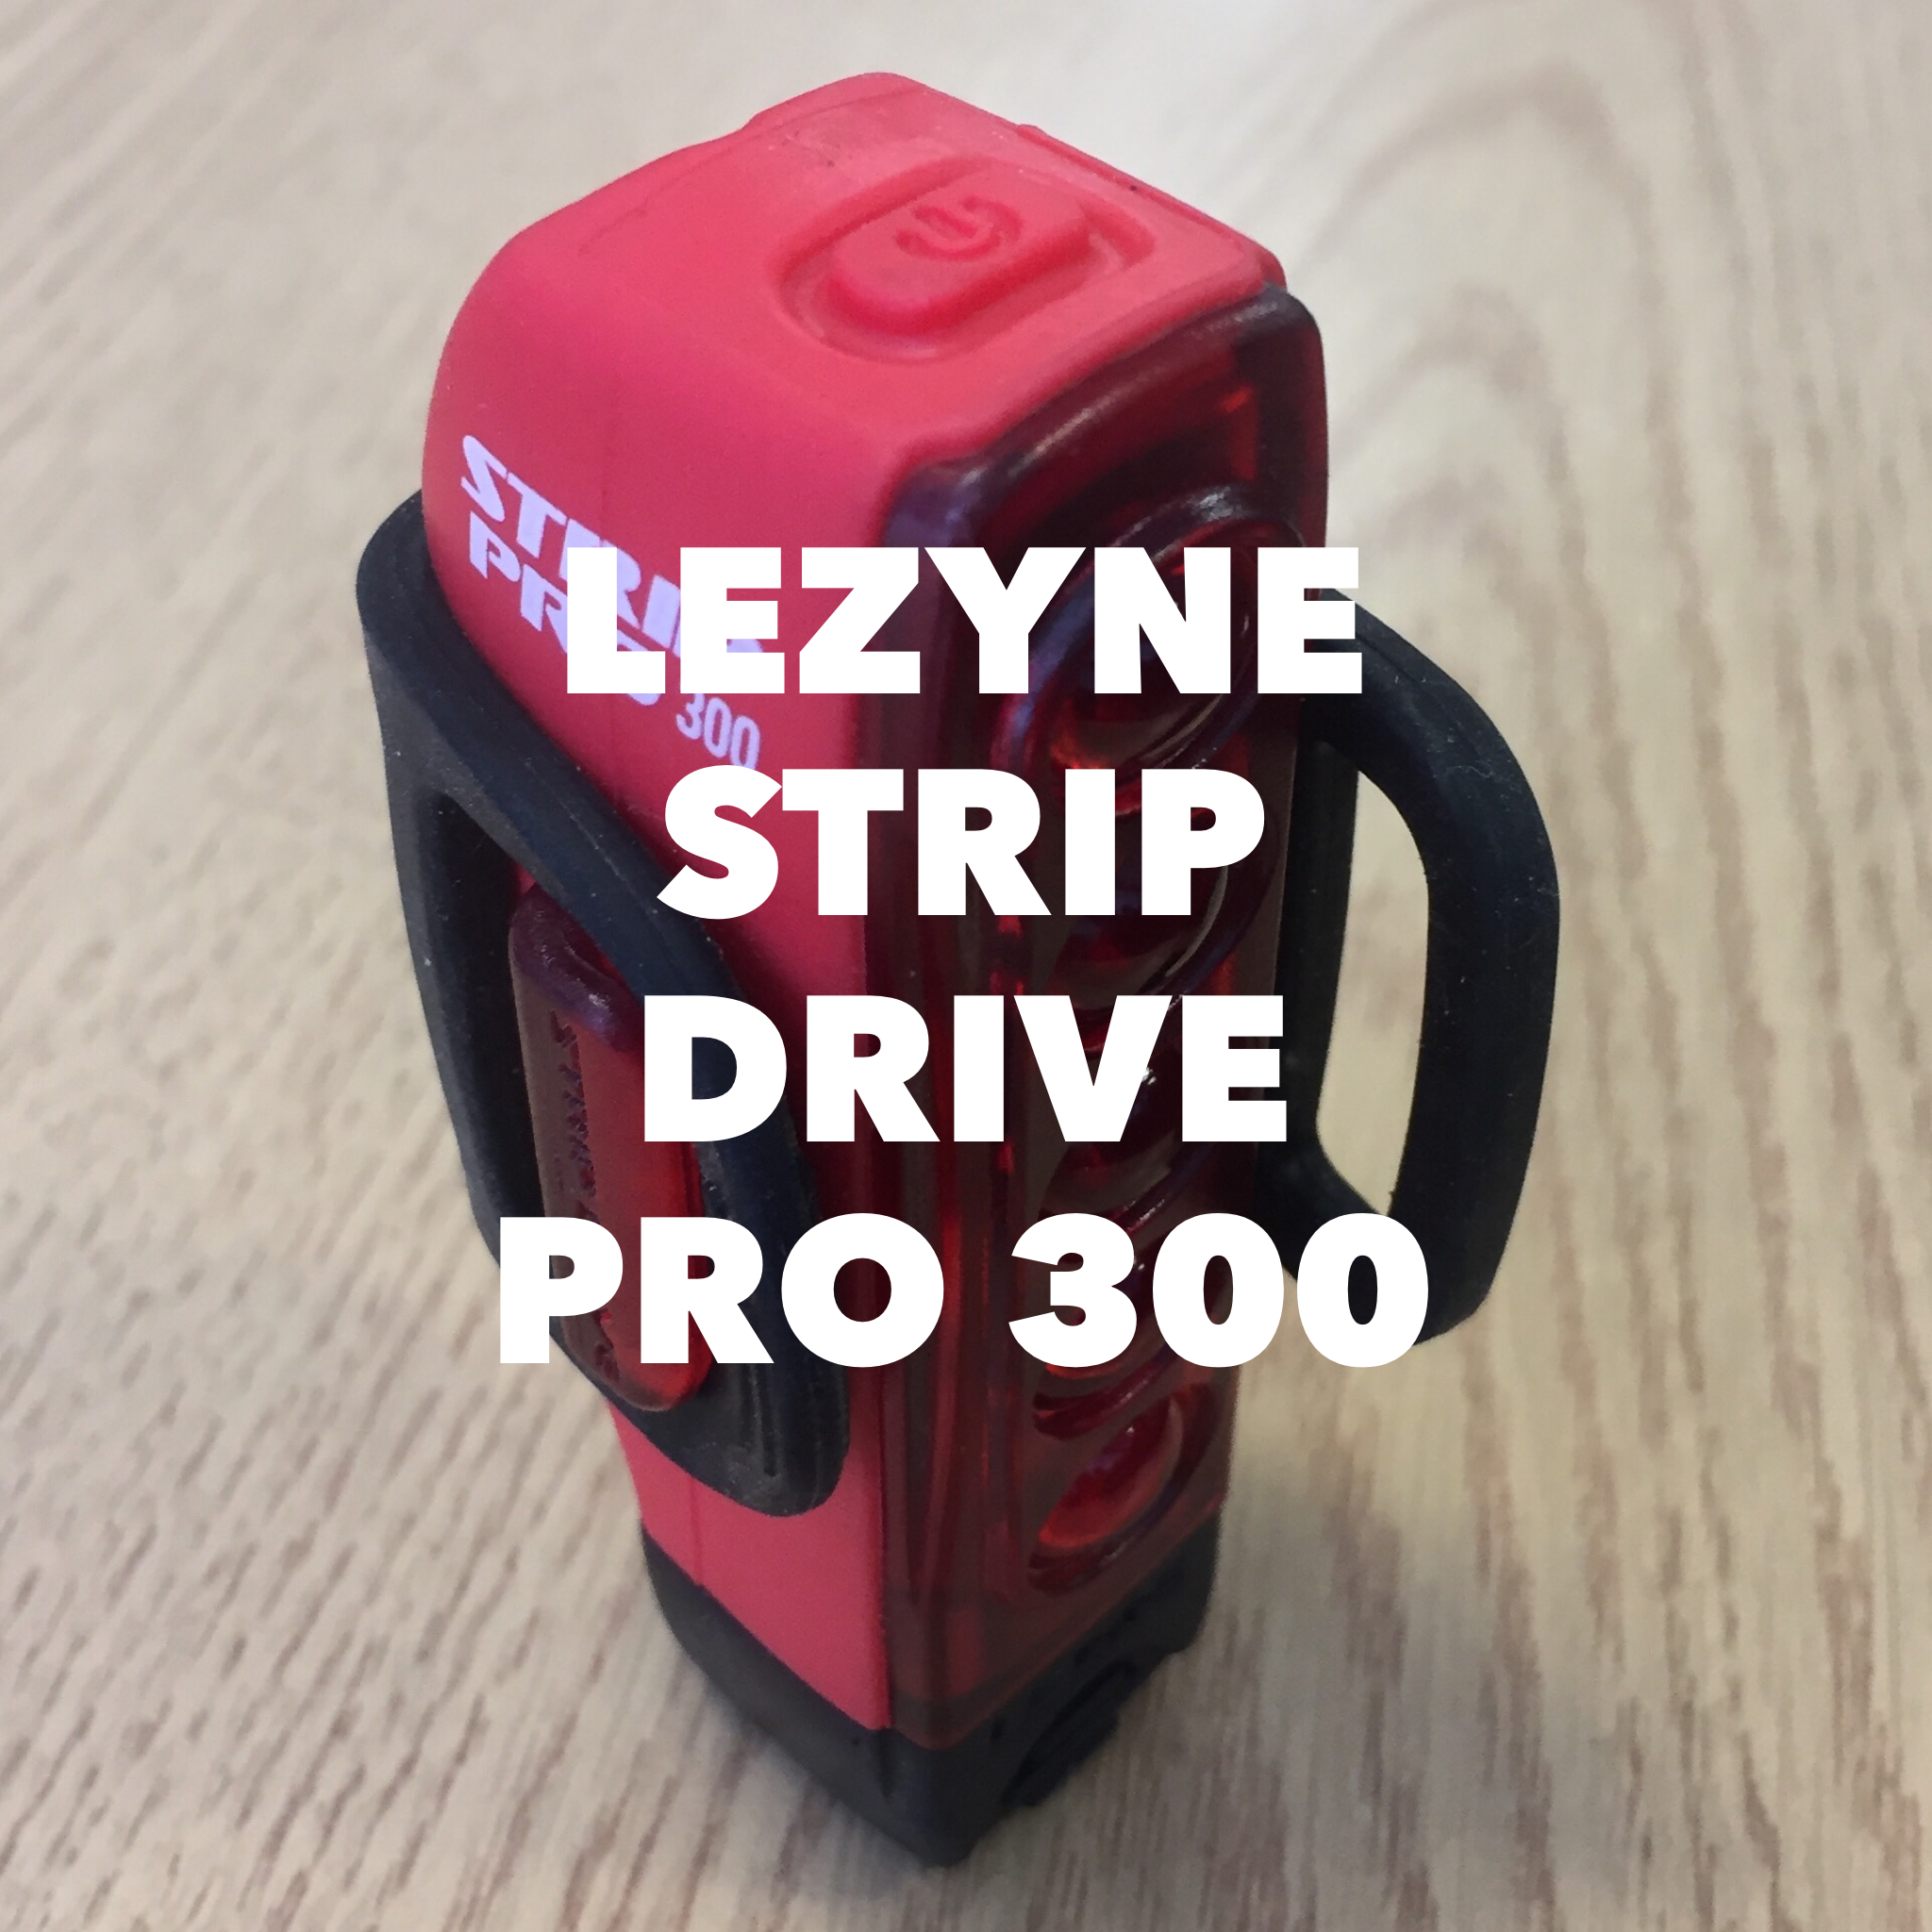 Lezyne Strip Drive Pro 300 Rear Light Review Real Athletes Trusted Reviews